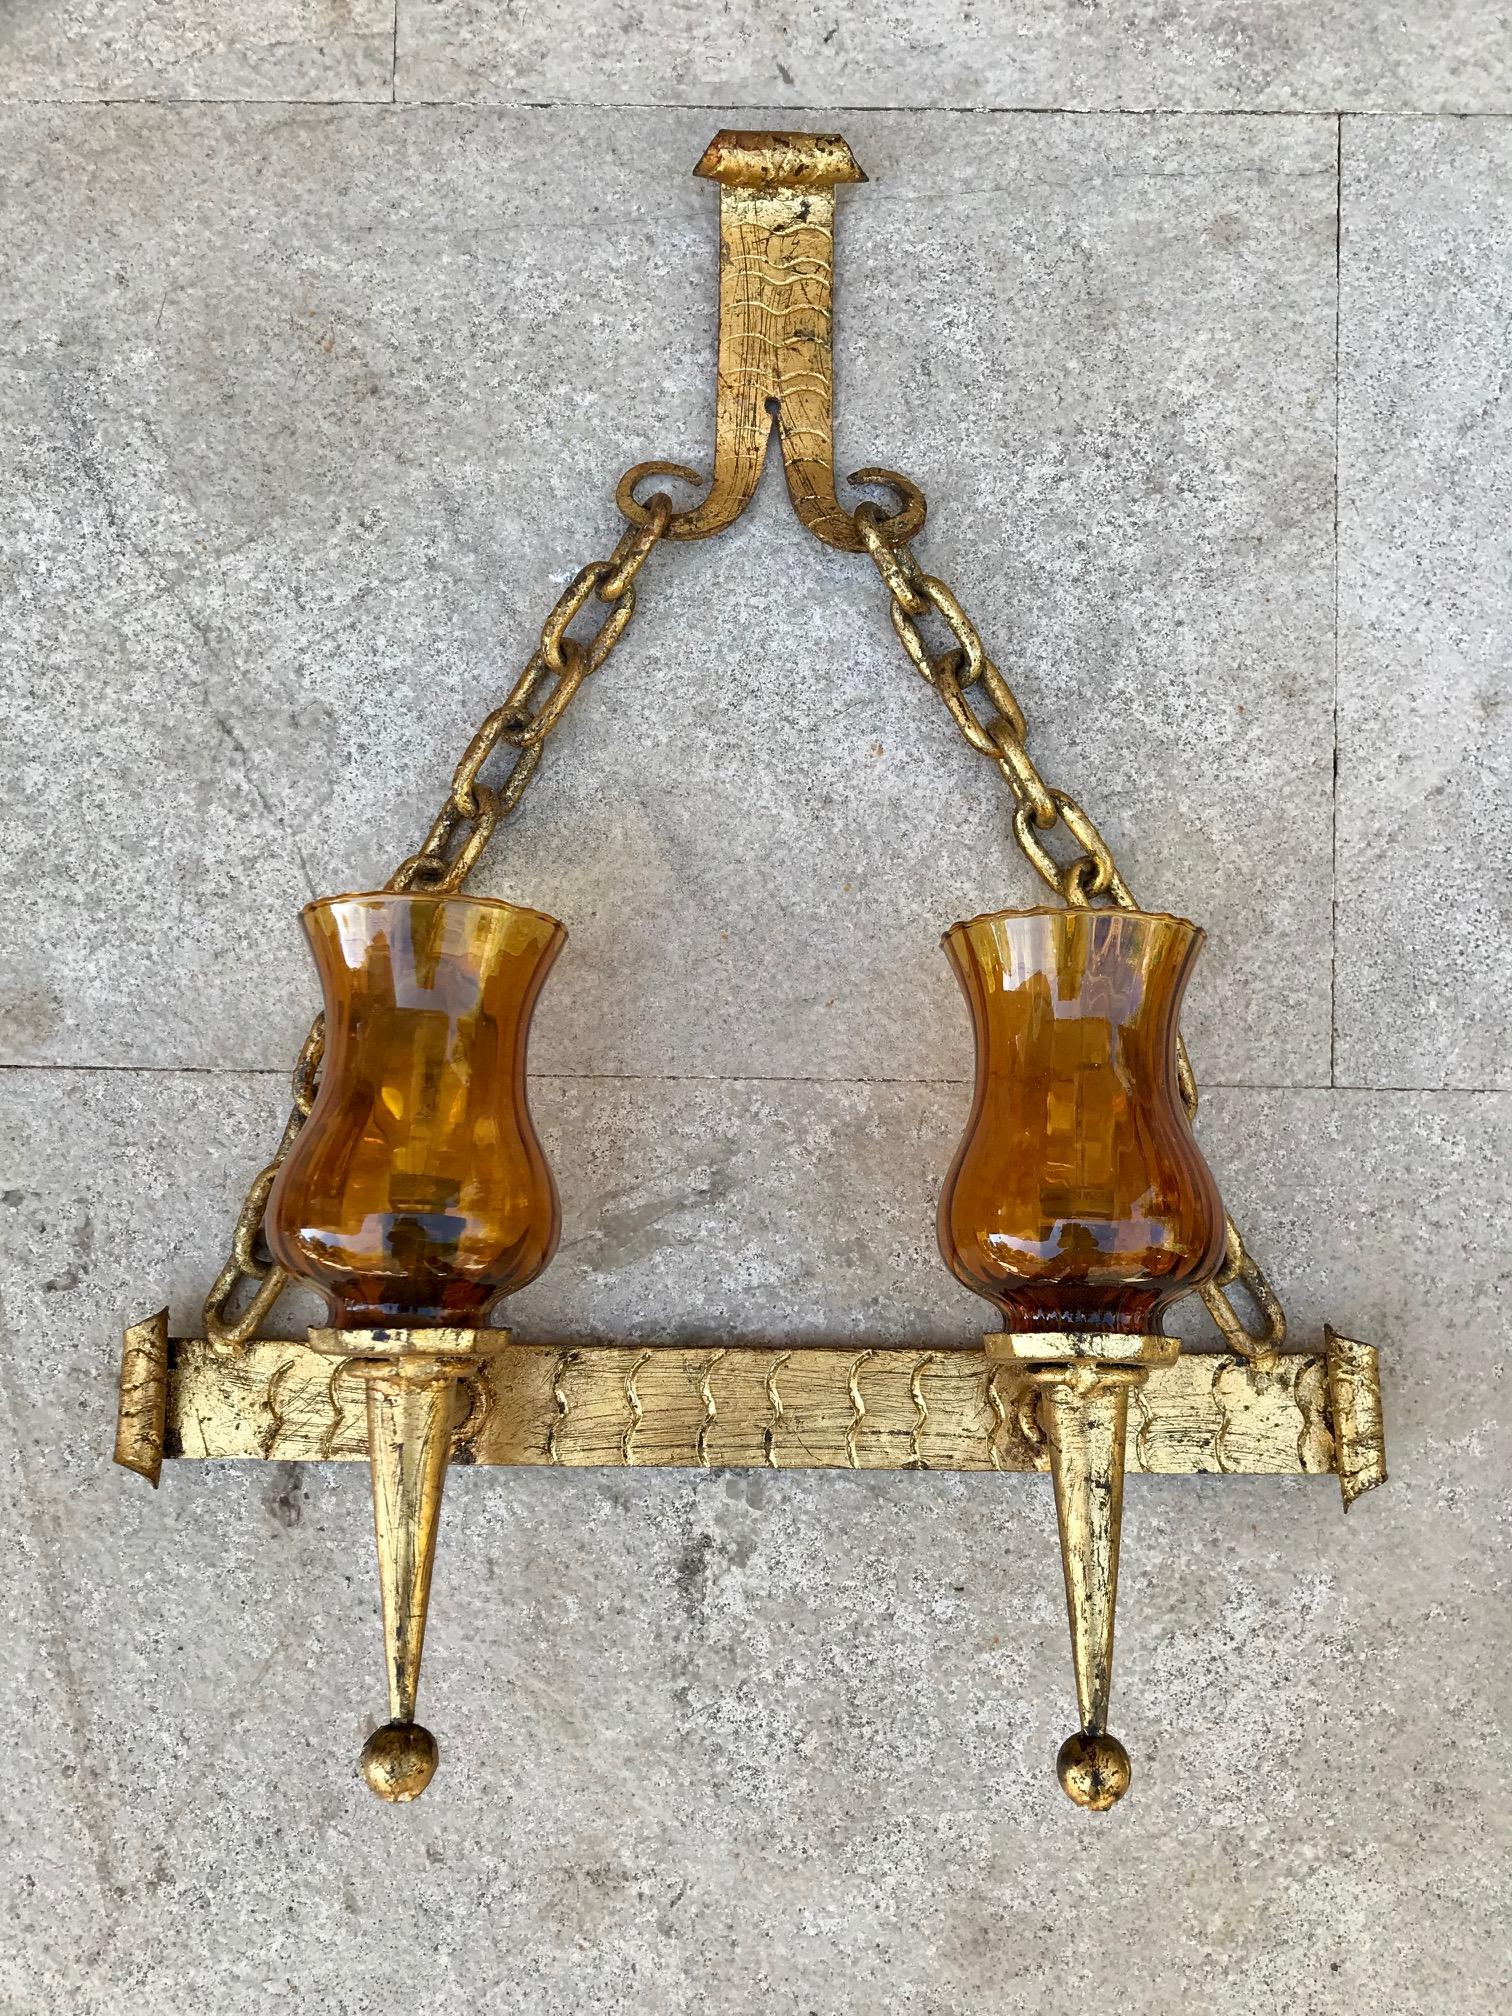 20th century set of French decorative gilt wrought iron sconces with glass shadows.

Measures: Pair sconces: W 14.56in, D 4.72in, H 8.26in.
 